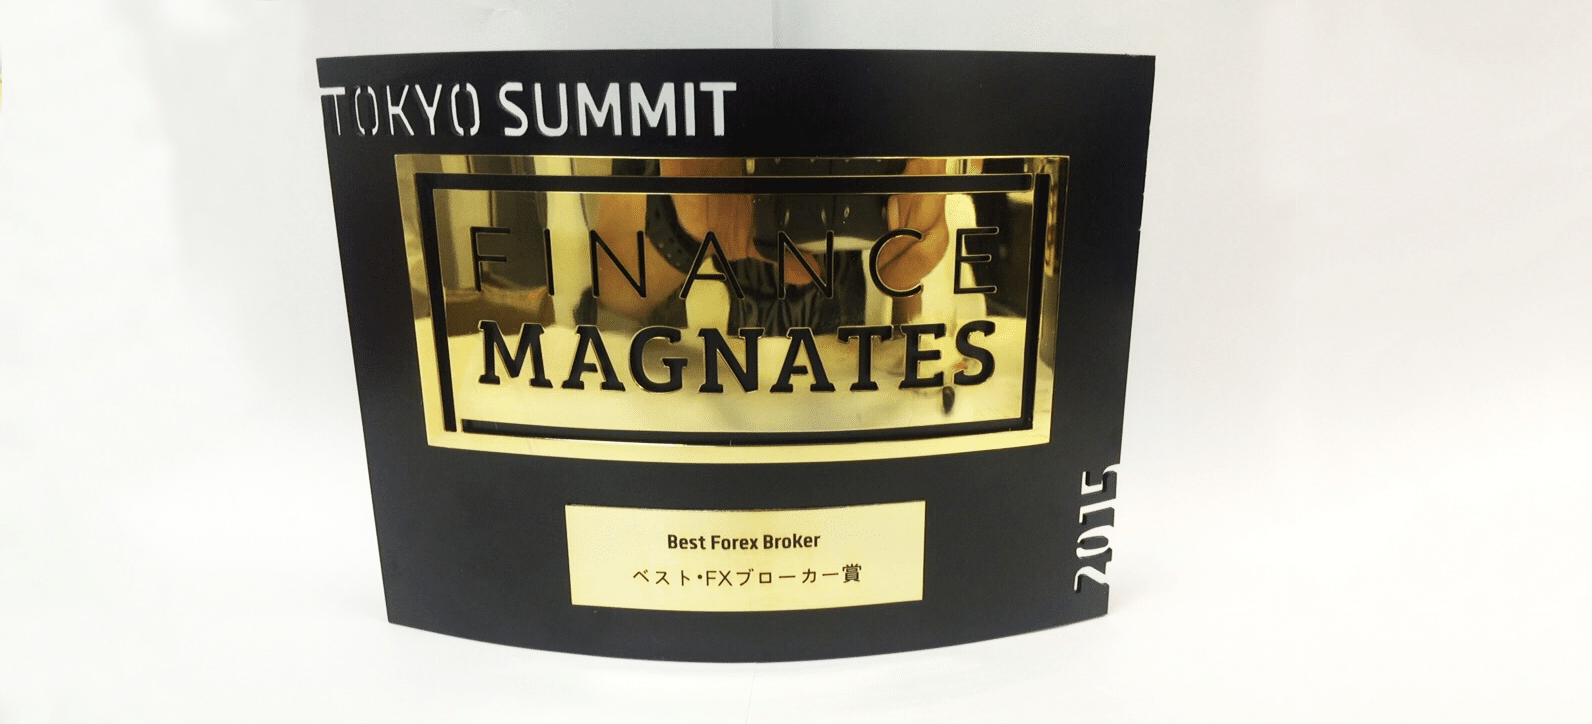 Traders Securities Awarded Best FX Broker at Finance Magnates' Tokyo Summit 2015